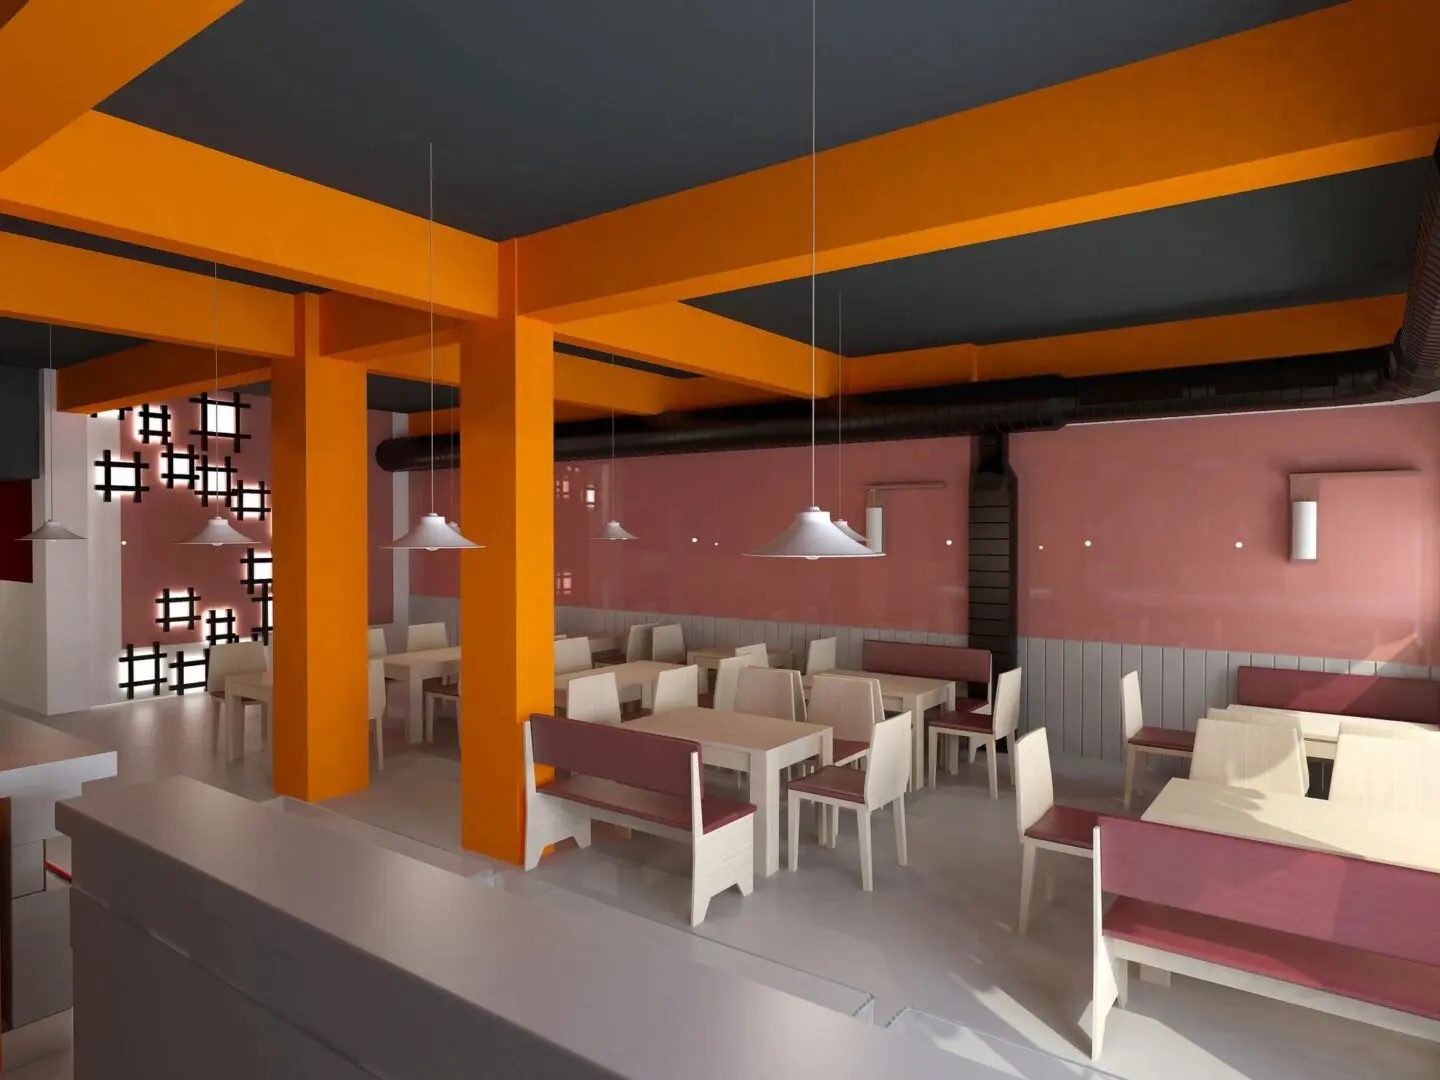 A 3d rendering of a restaurant with orange walls.